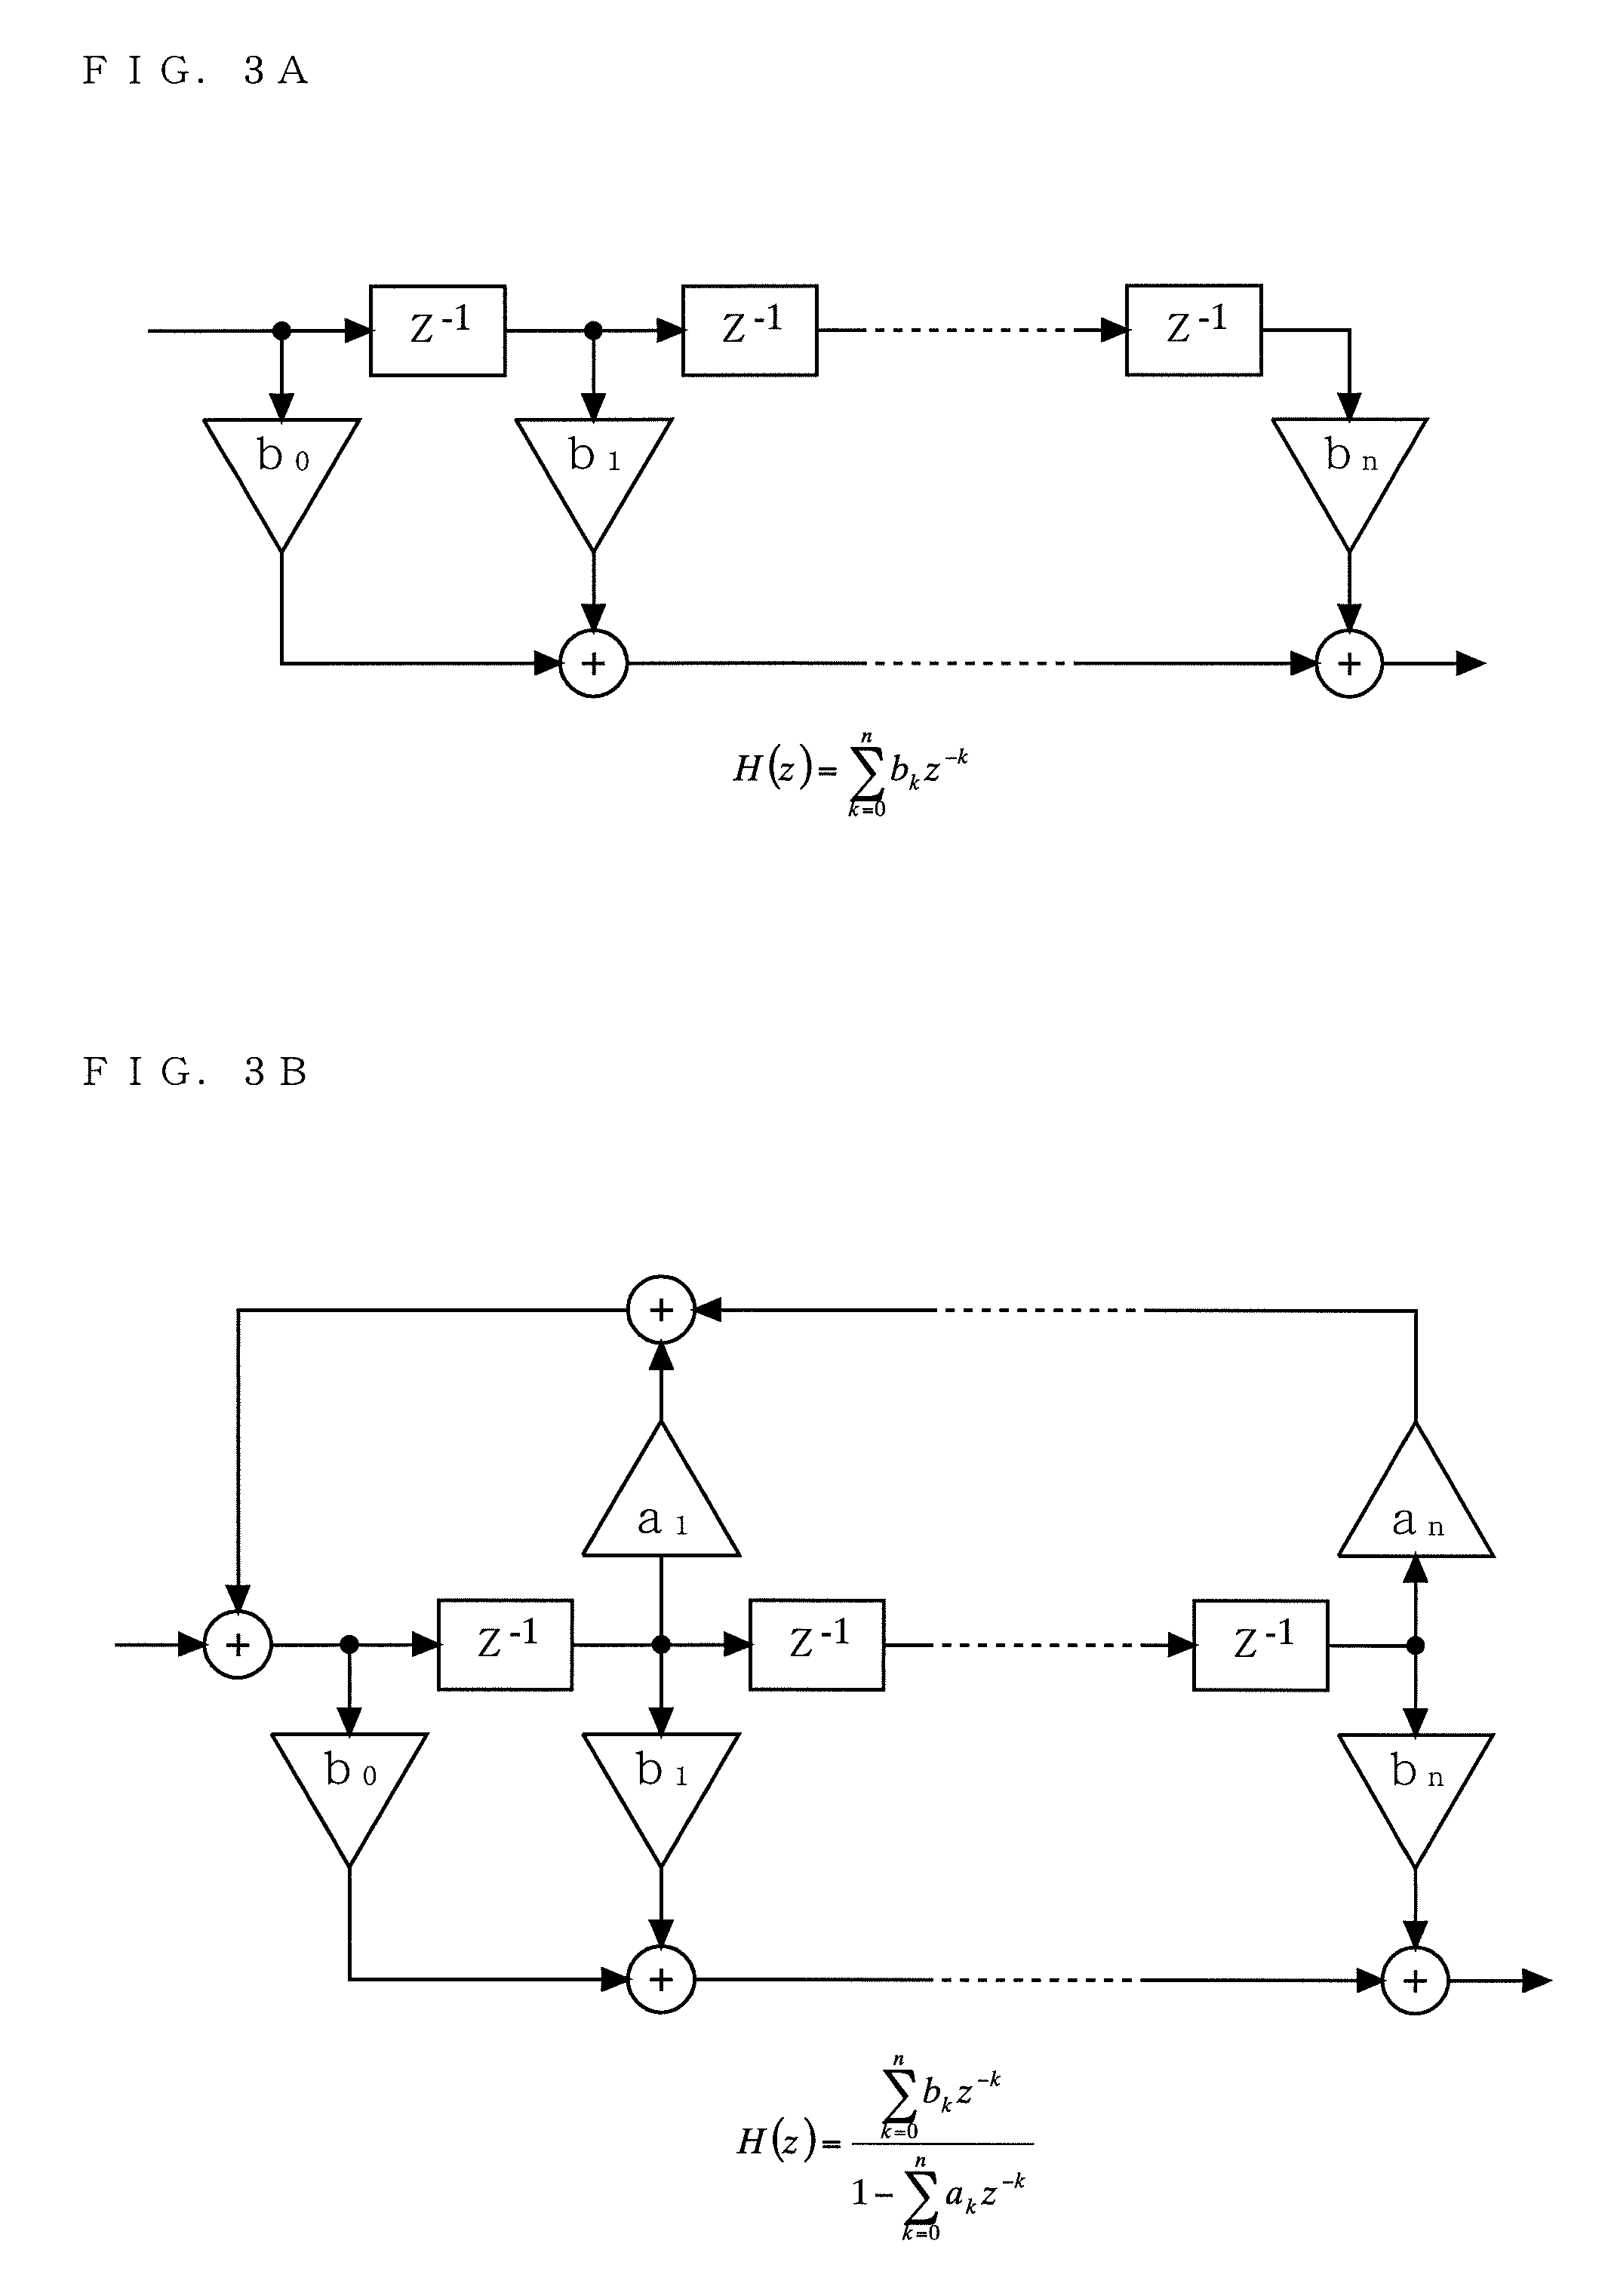 Transmitter and communication apparatus